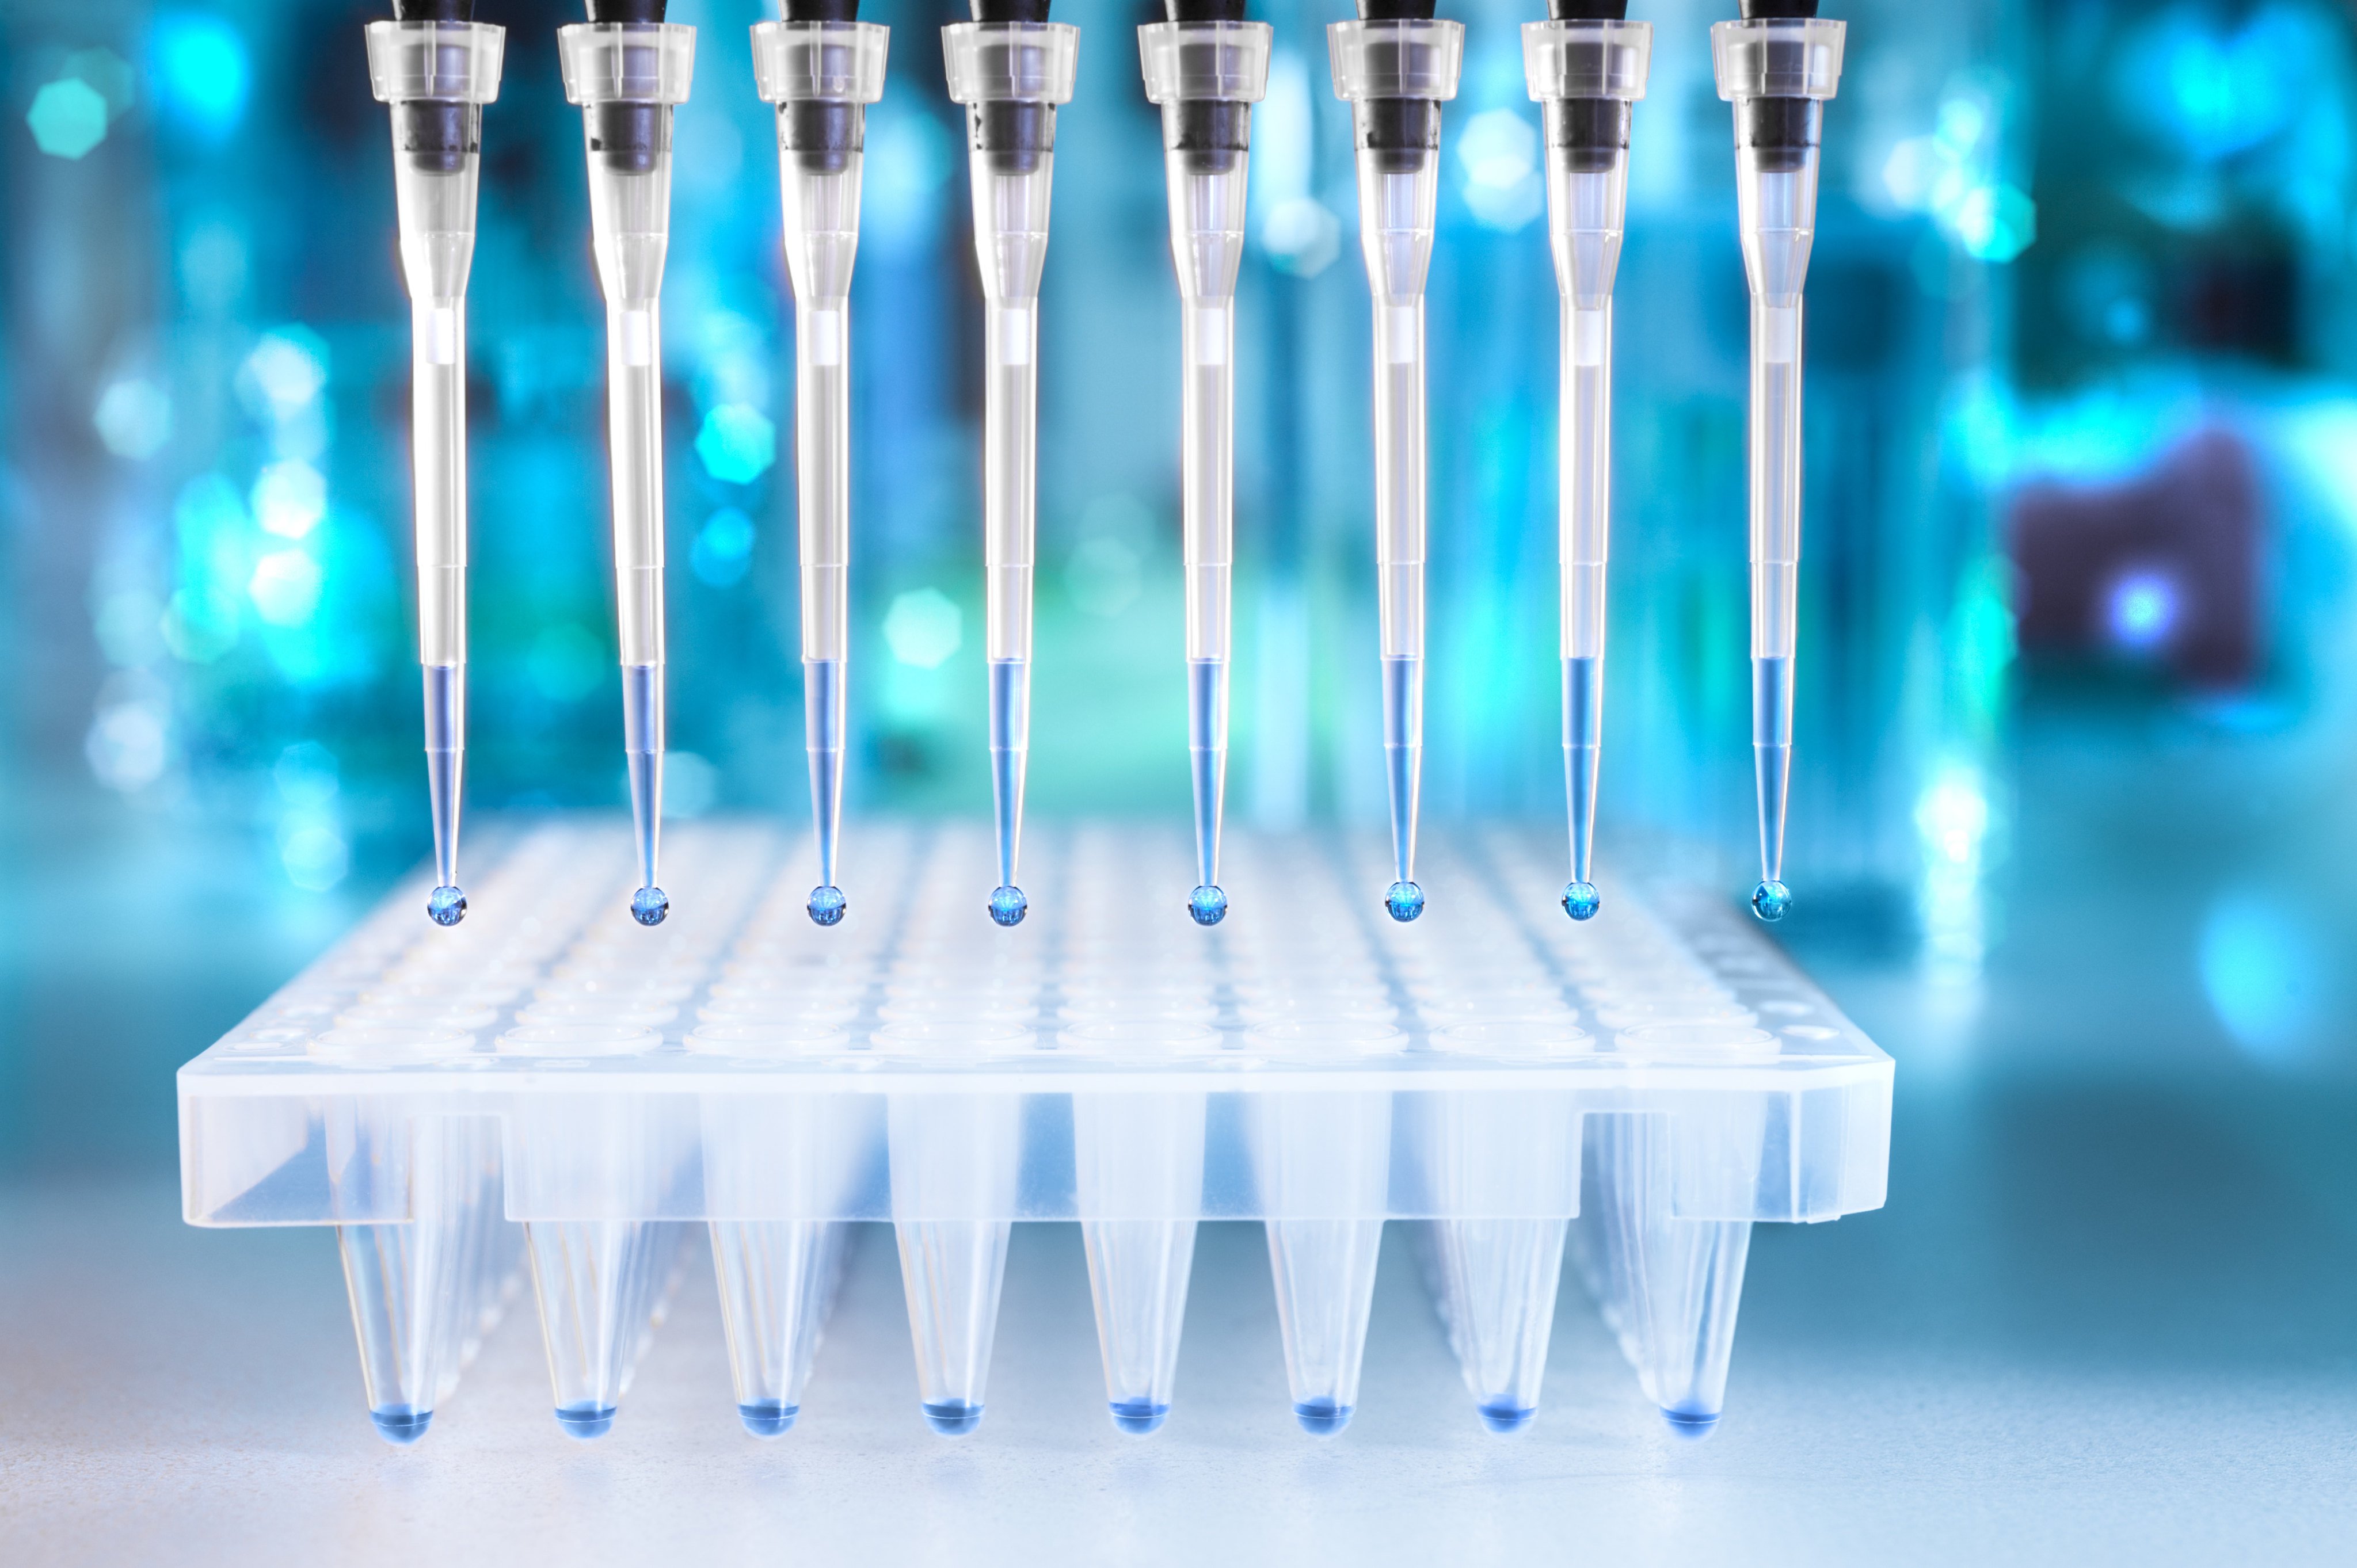 The Hong Kong government has created funding incentives to support life sciences firms in every stage of their development from basic research to clinical trials, manufacturing, and marketing, official says. Photo: Shutterstock